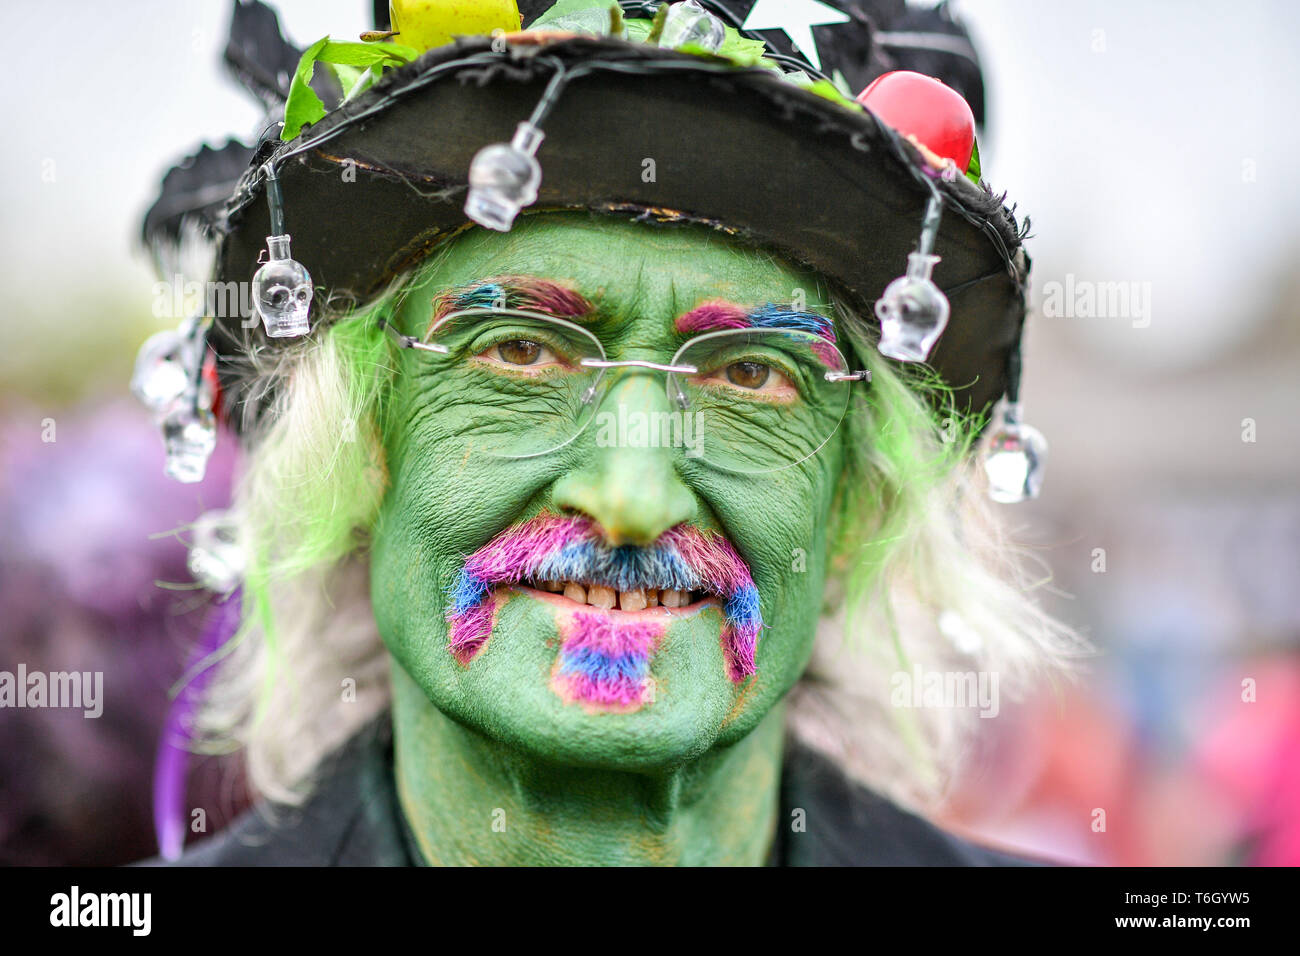 Glastonbury Border Morris Edwin Growney wears green face paint during the Beltane celebrations at Glastonbury Chalice Well, where people gather to observe a modern interpretation of the ancient Celtic pagan fertility rite of Spring. Stock Photo